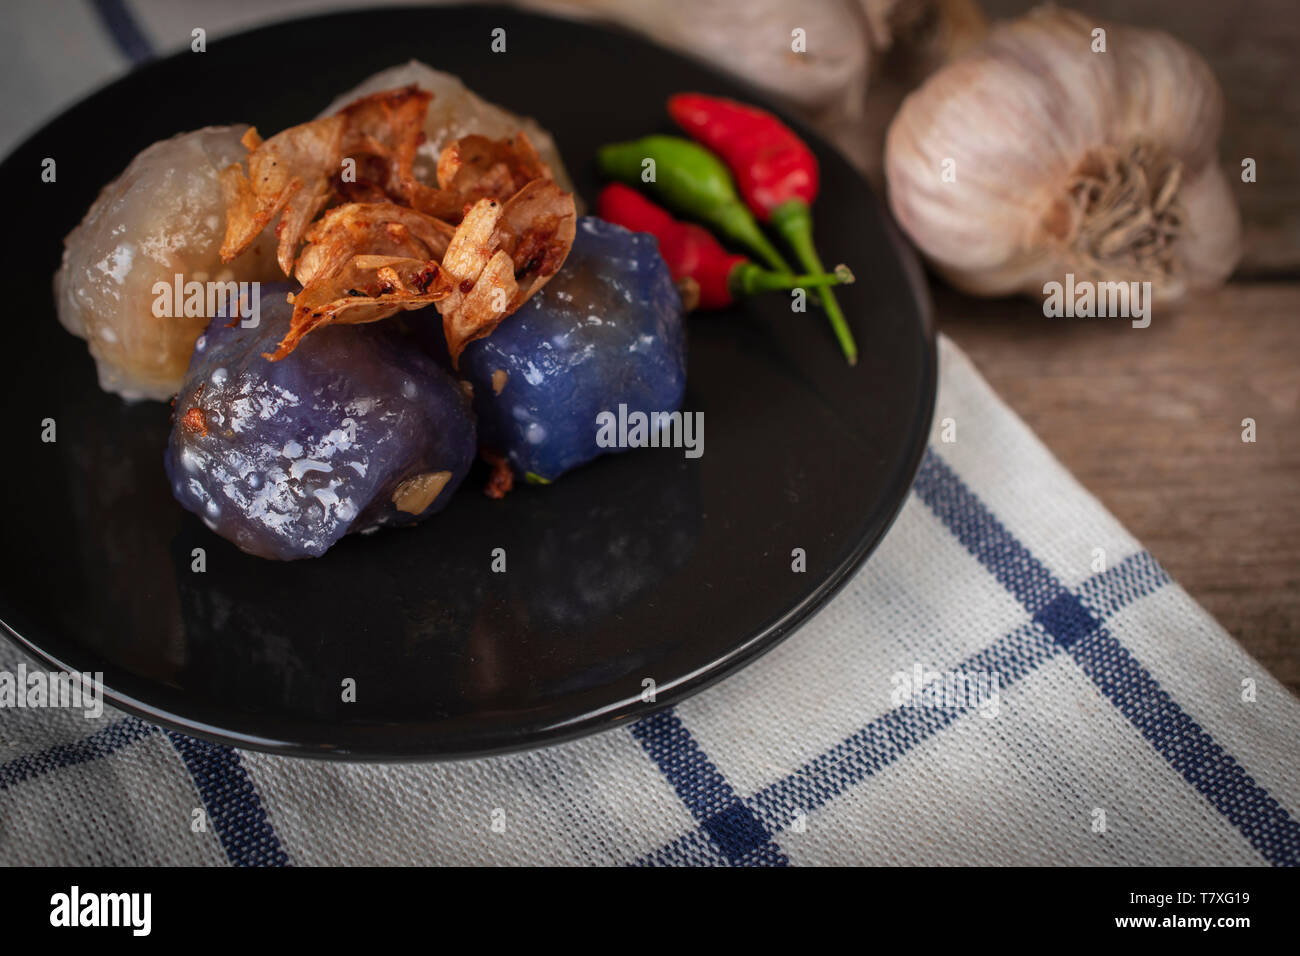 Sago pork in circle black plate with fried garlic toping have garlic place backside and chilli place on black plate on tablecloth and wood background Stock Photo